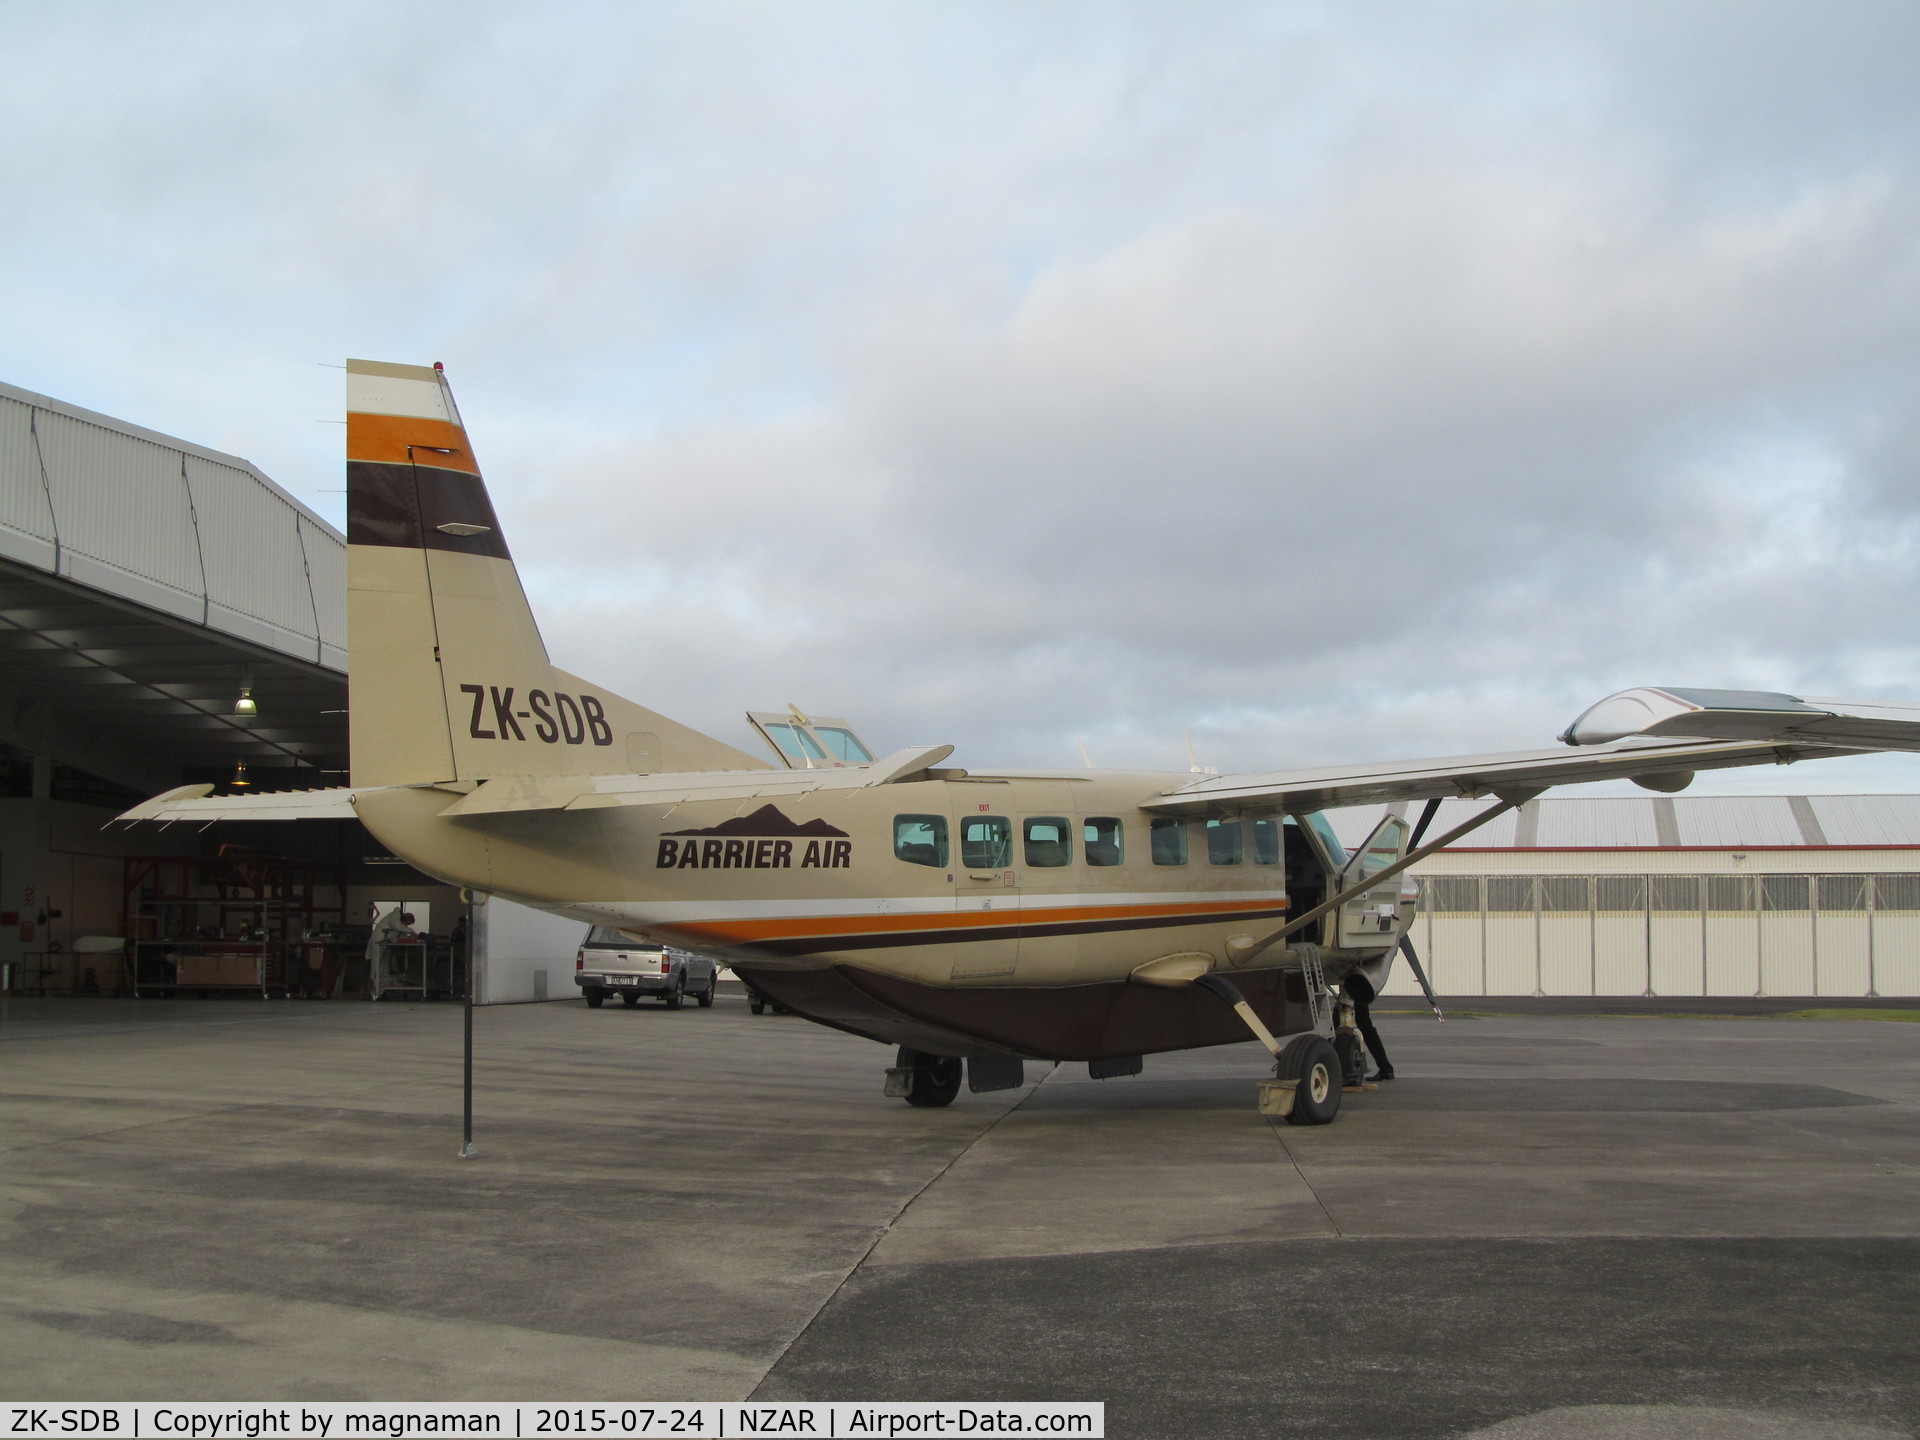 ZK-SDB, 2009 Cessna 208B Grand Caravan C/N 208B2089, Ex. N988BA delivered earlier this month. I think today is first delivery flight post check and re-registration to Great Barrier Airlines